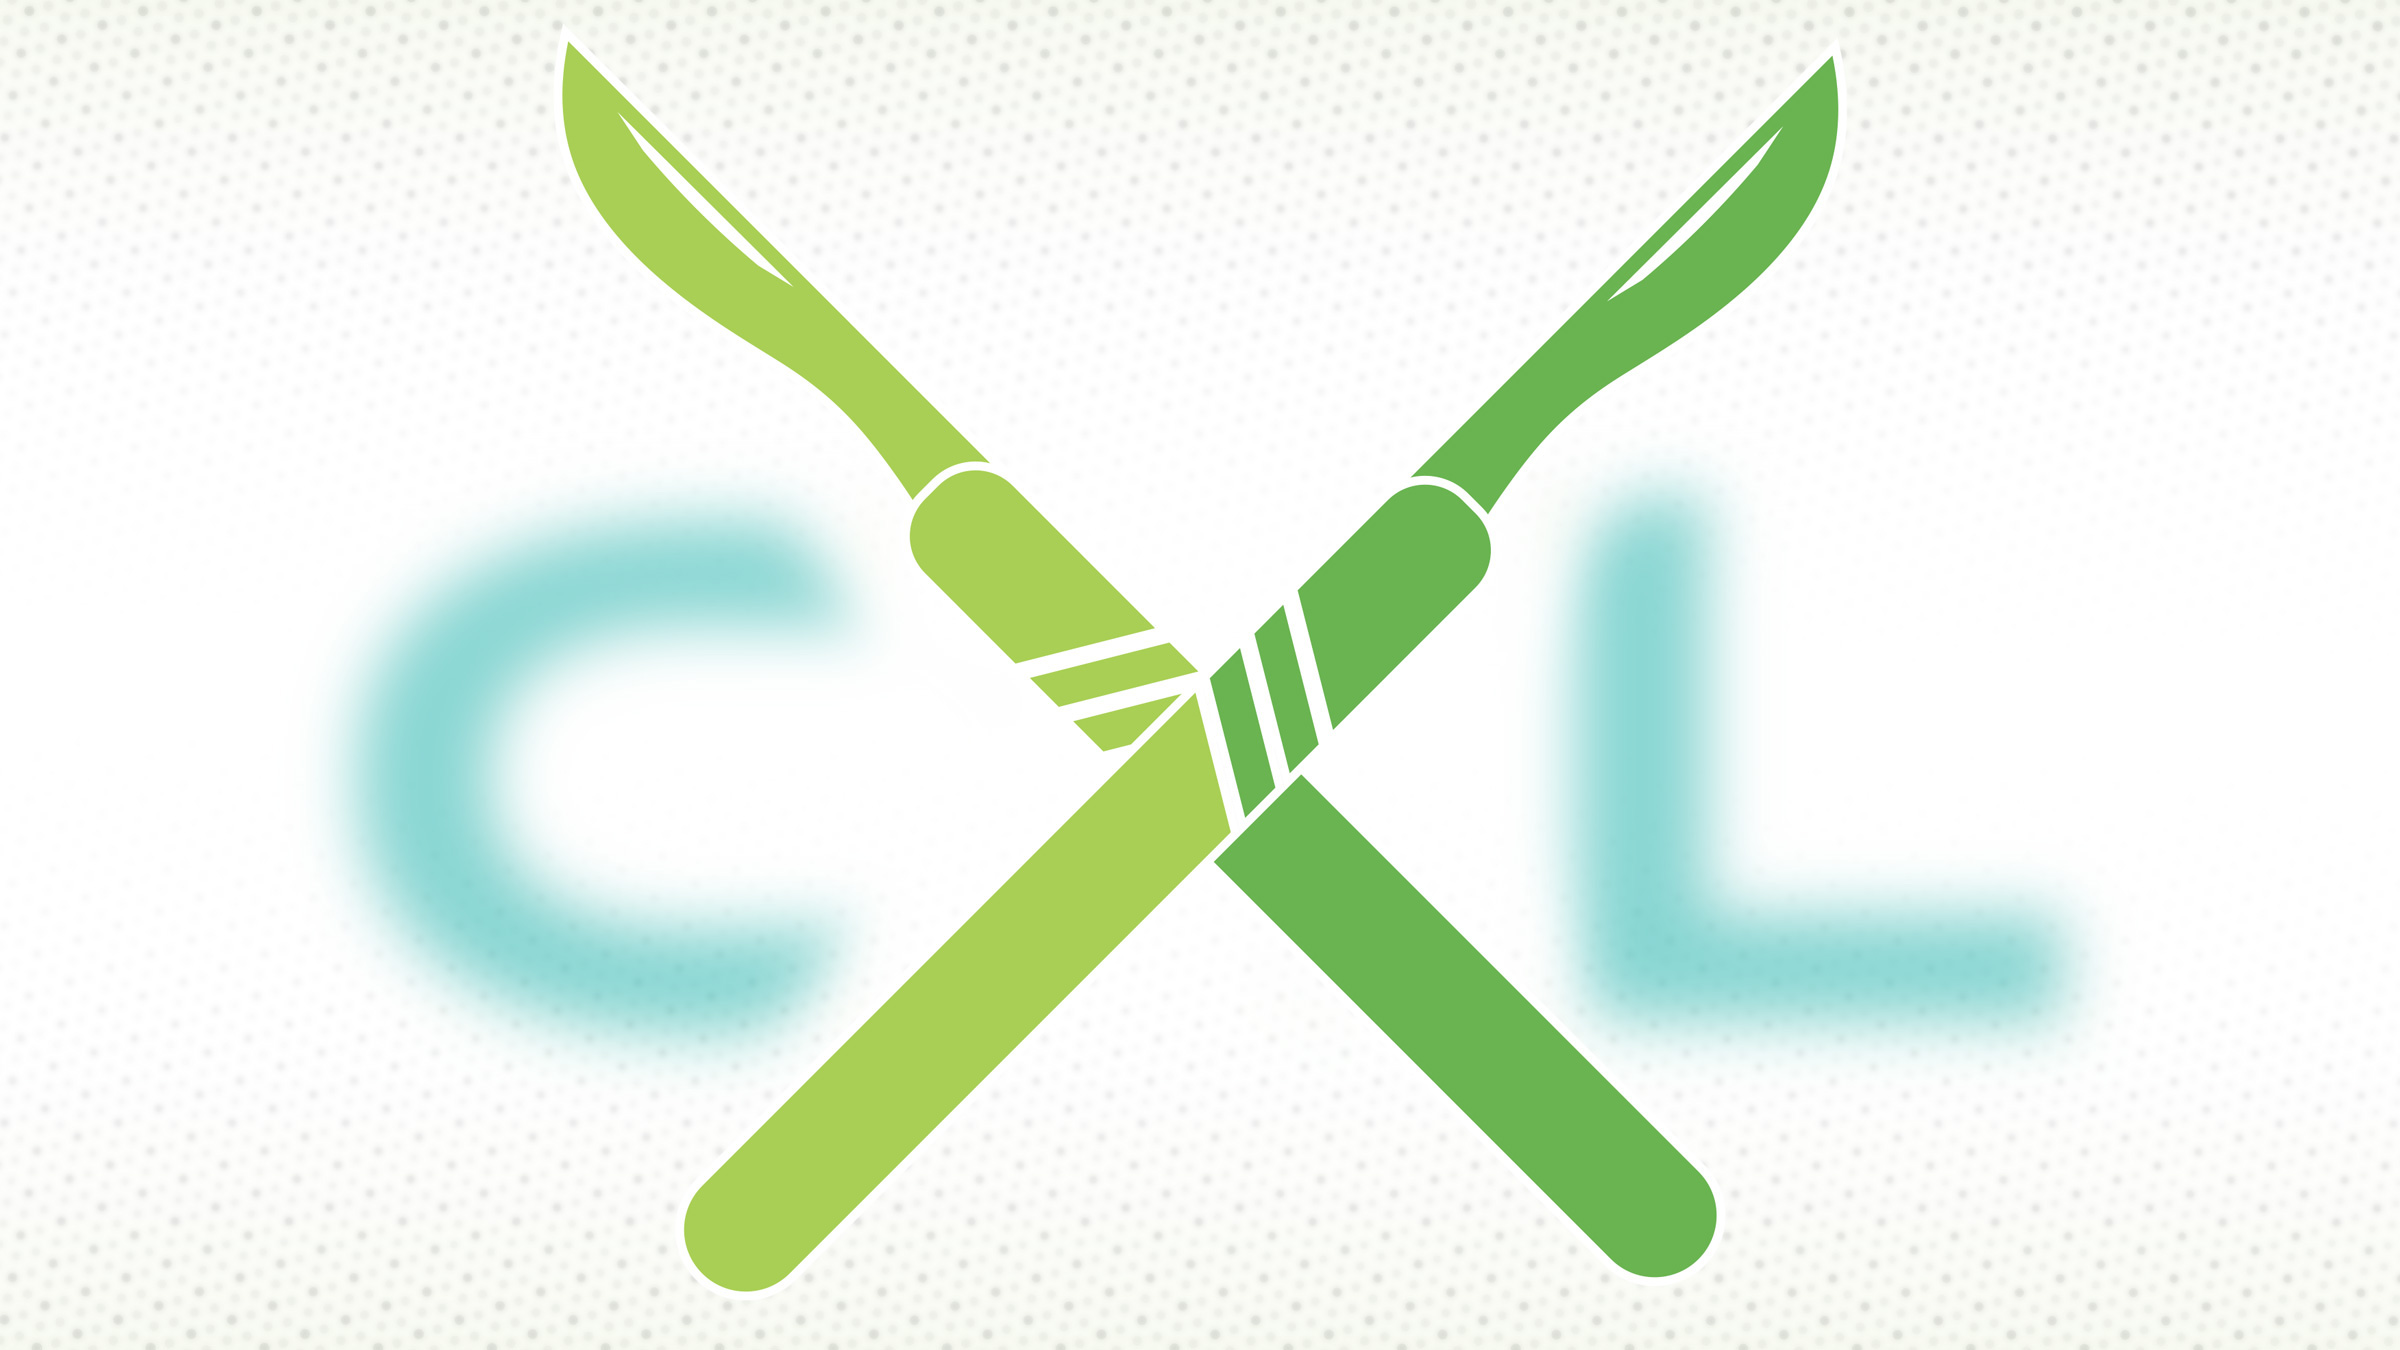 the initials CXL, with X formed by crossed penknives, illustration